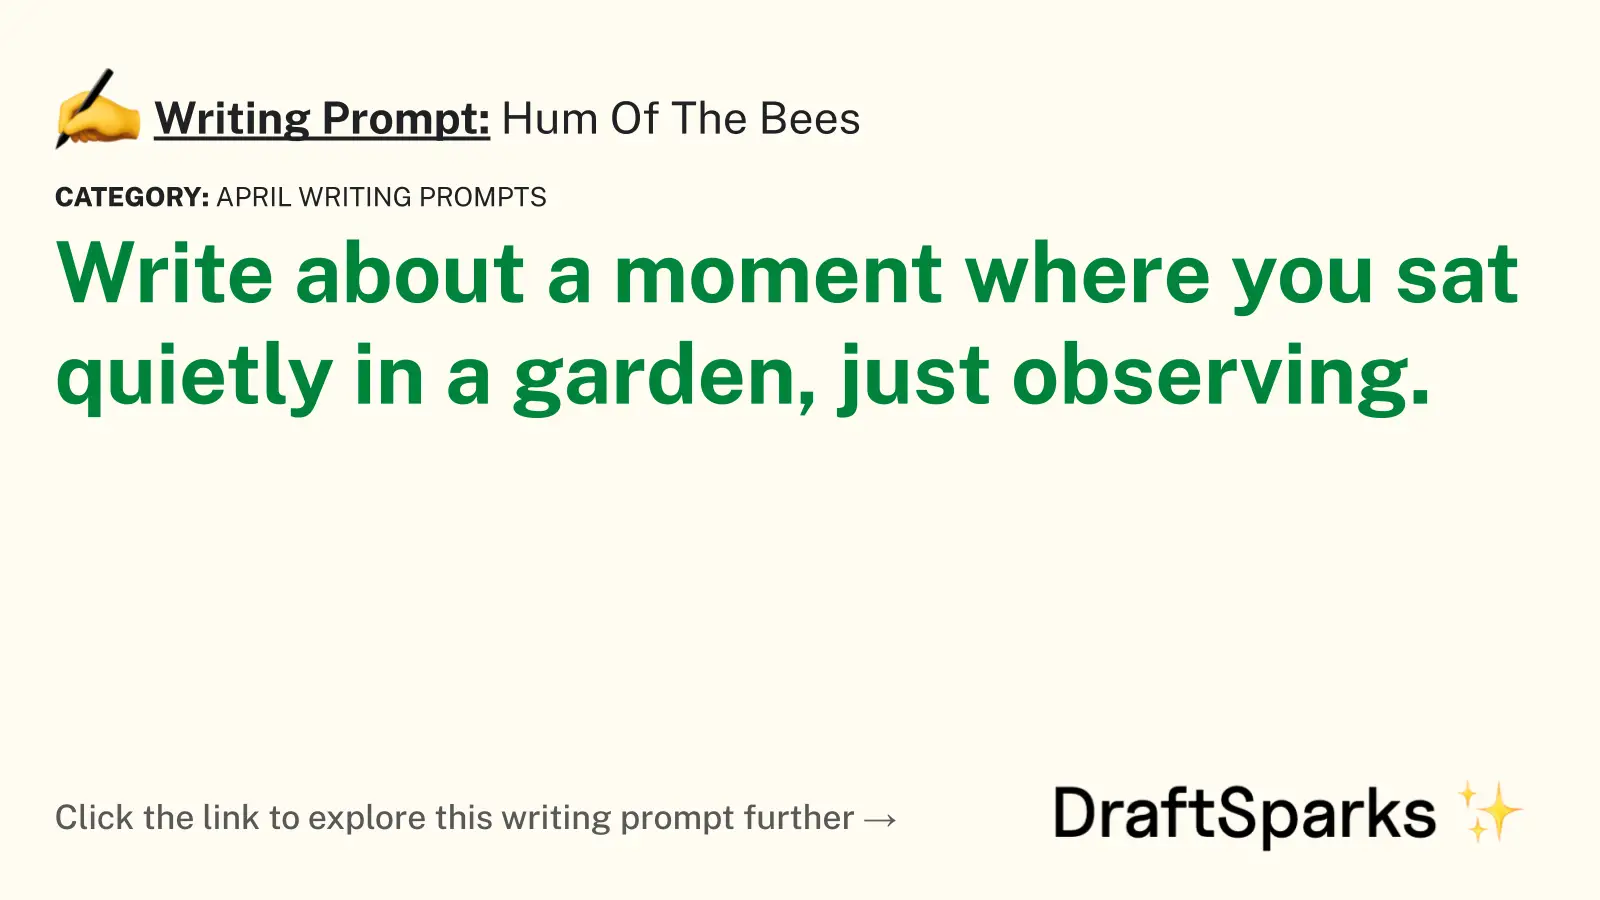 Hum Of The Bees